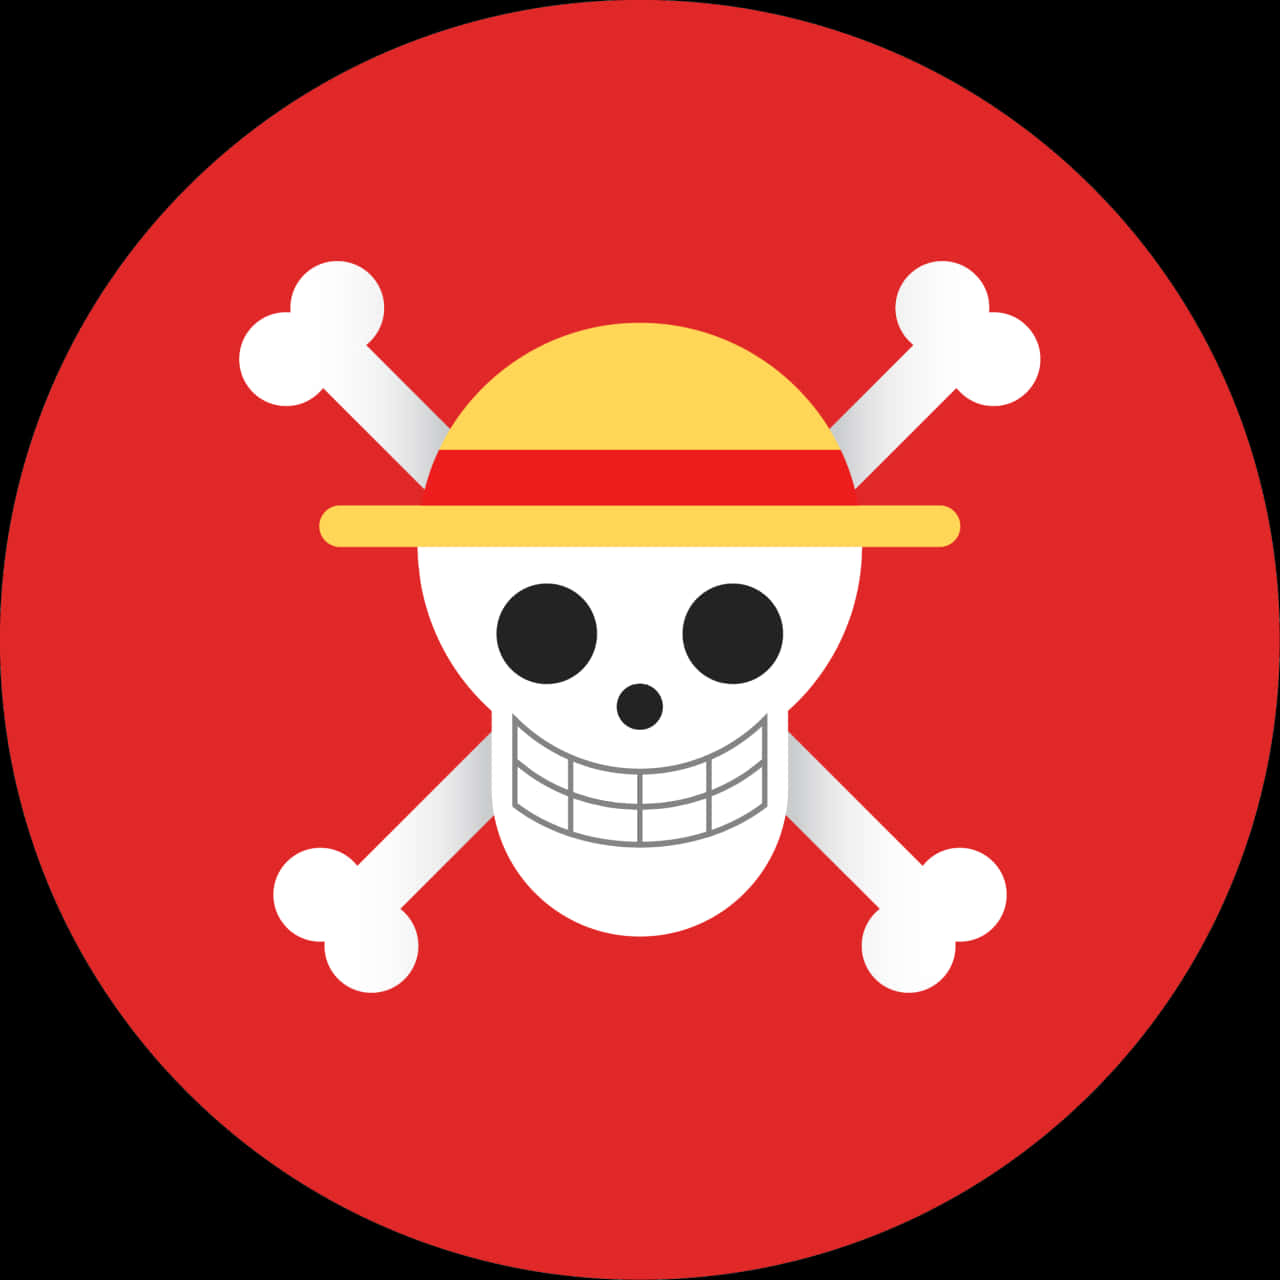 A Cartoon Skull With Crossbones And A Hat